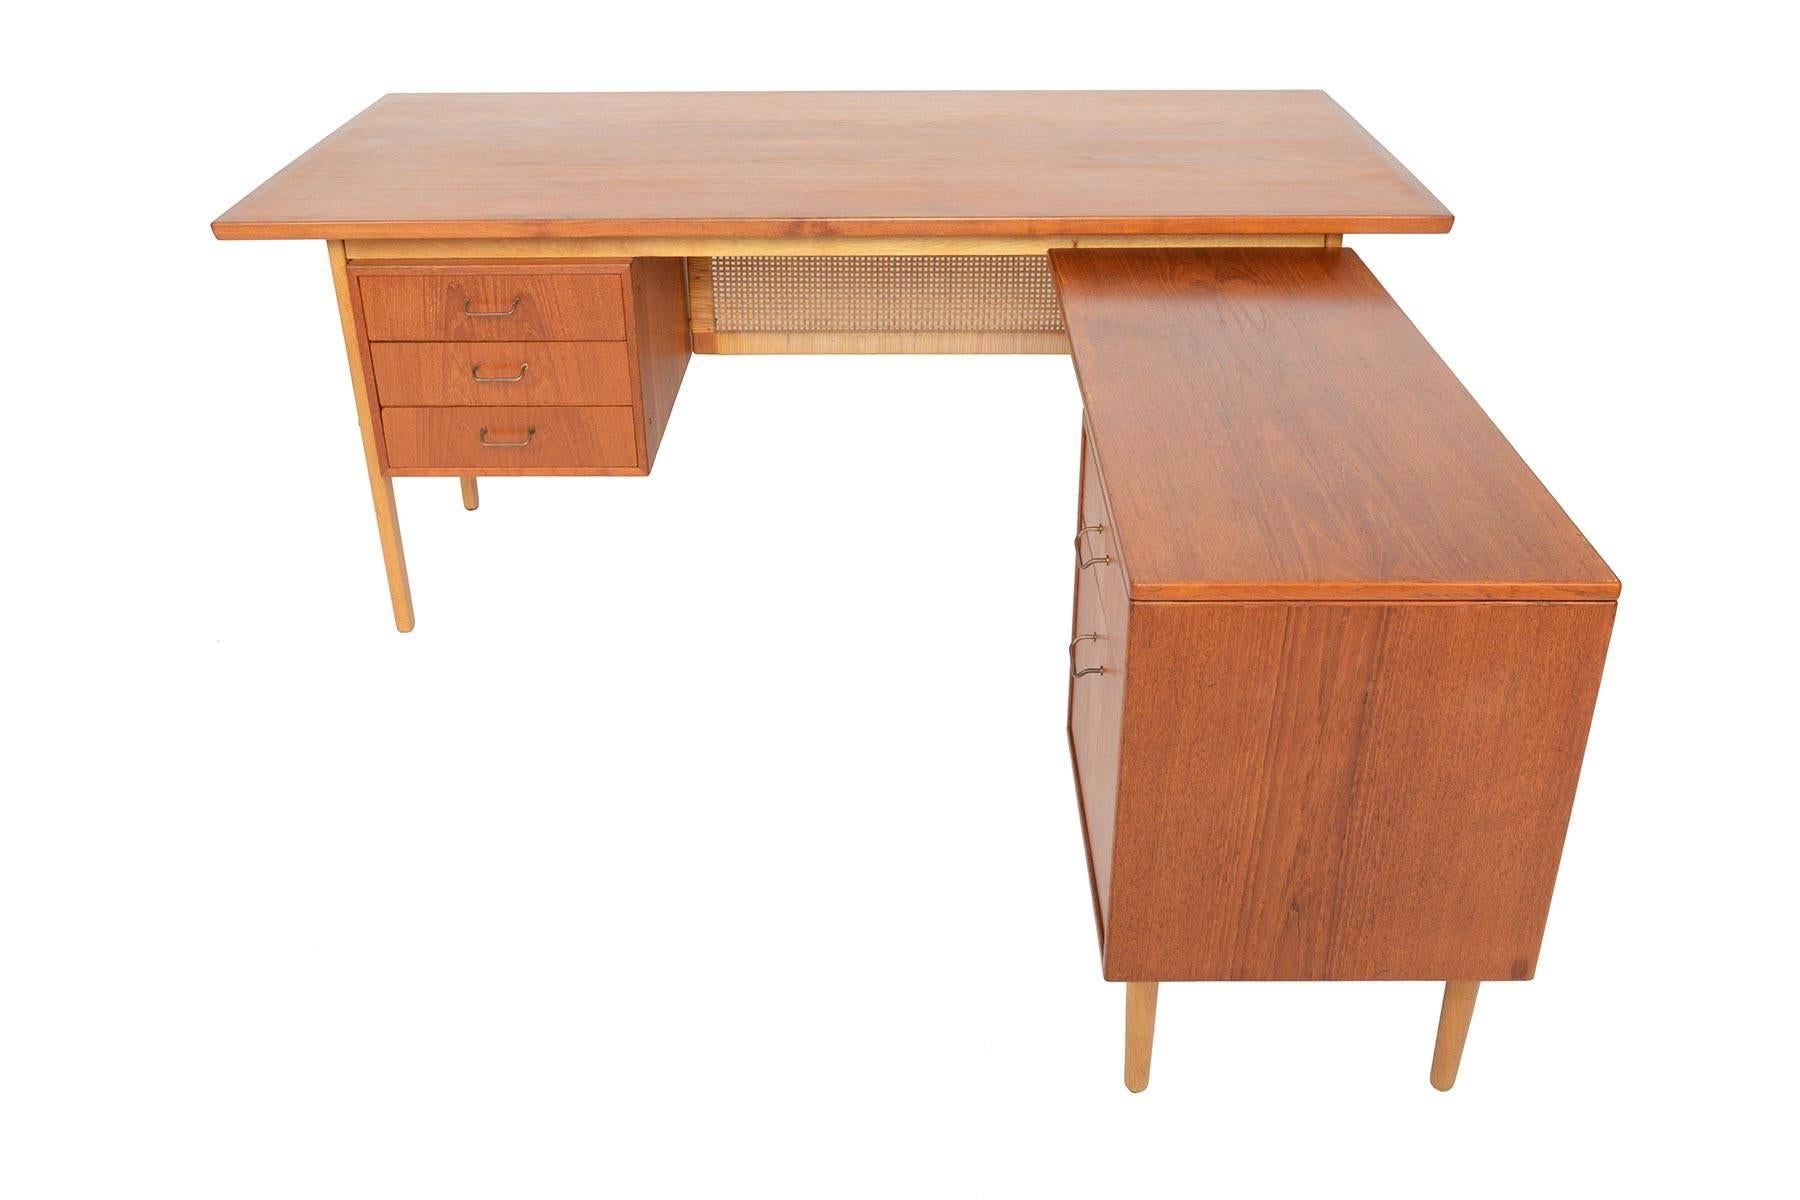 This remarkably well- preserved Danish modern executive desk was designed by Torben Strandgaard for Falster Møbelfabrik in the 1960s. This large desk features a detachable return on the right and provides a drawer and file cabinet. The large teak